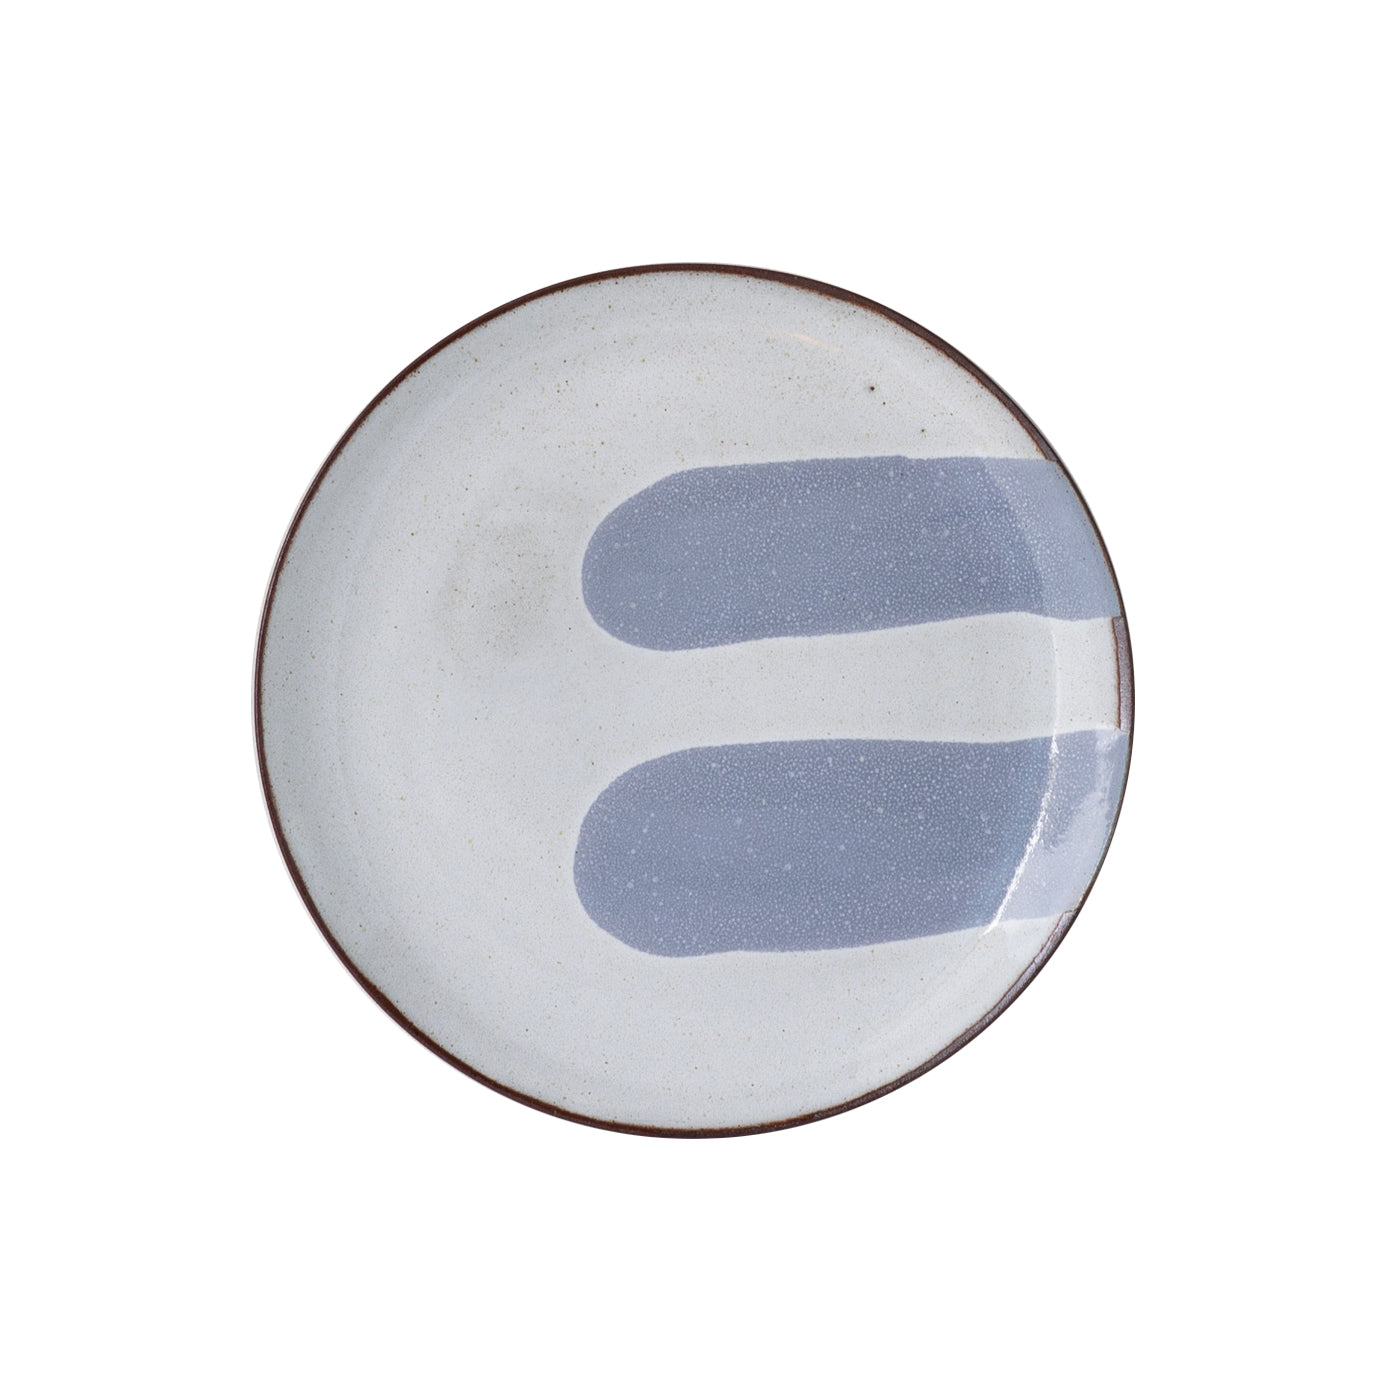 Silvia K hand made terracotta plate with white and 2 stone greyecor